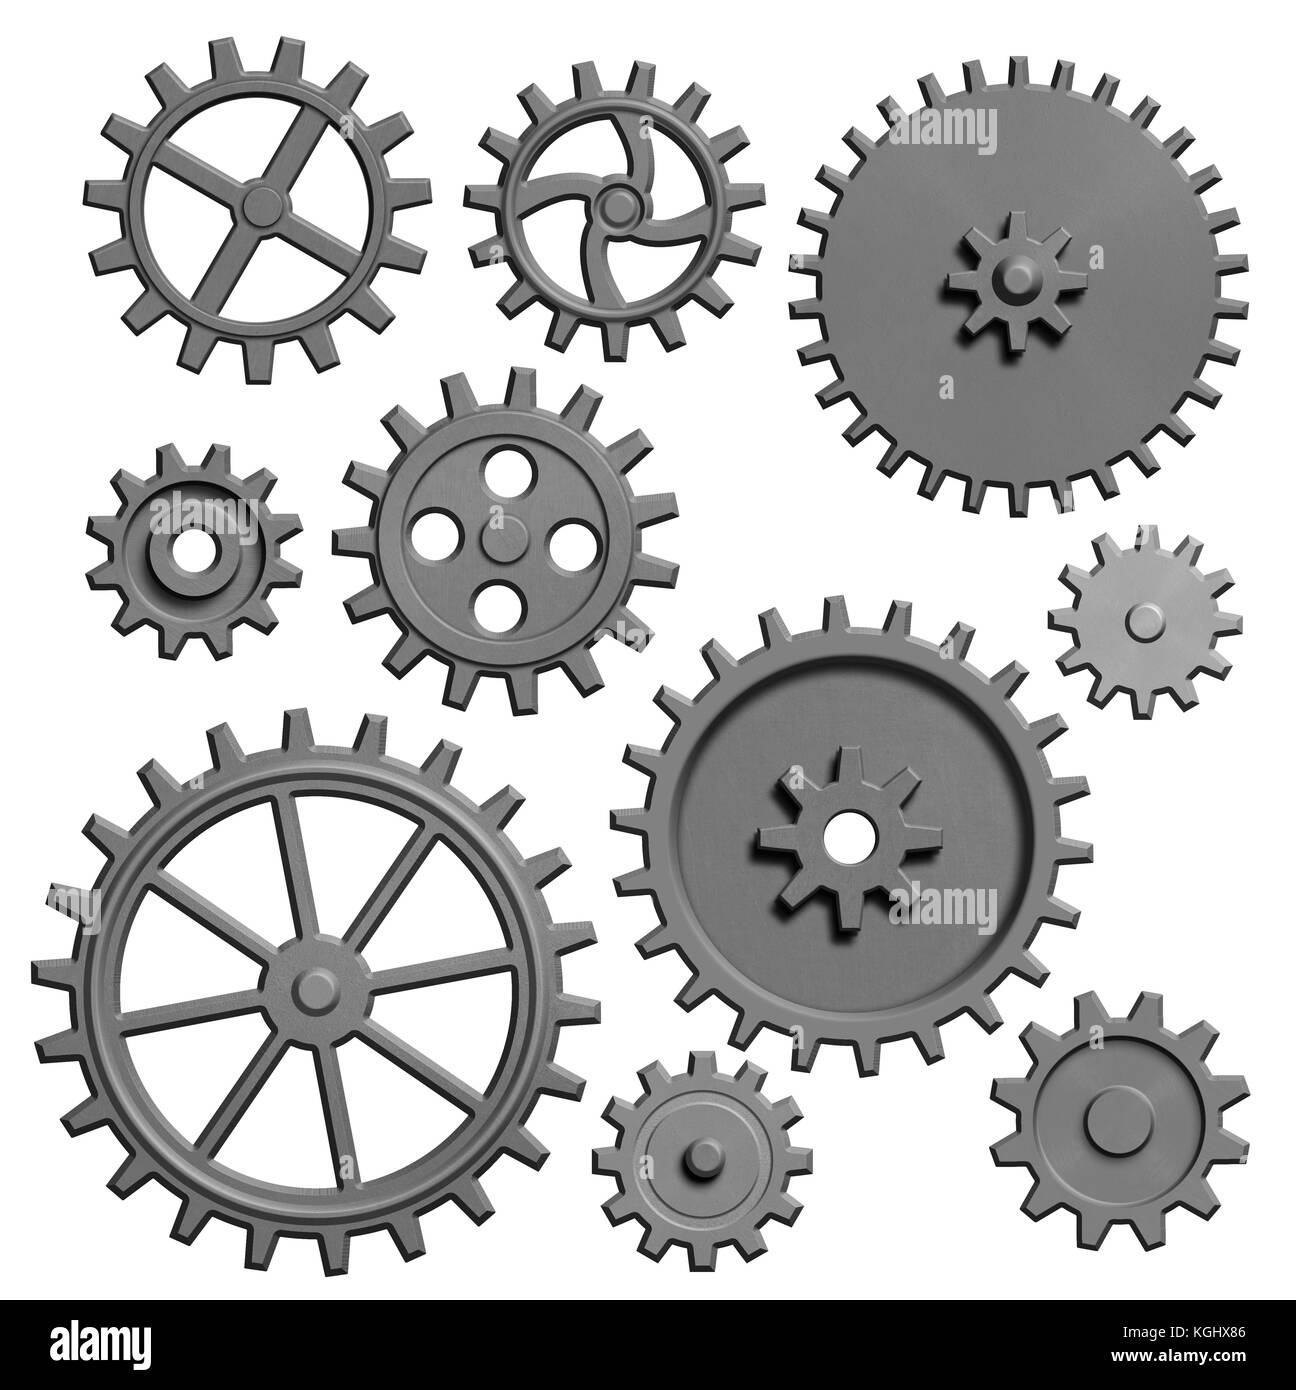 metal gears and cogs isolated 3d illustration Stock Photo